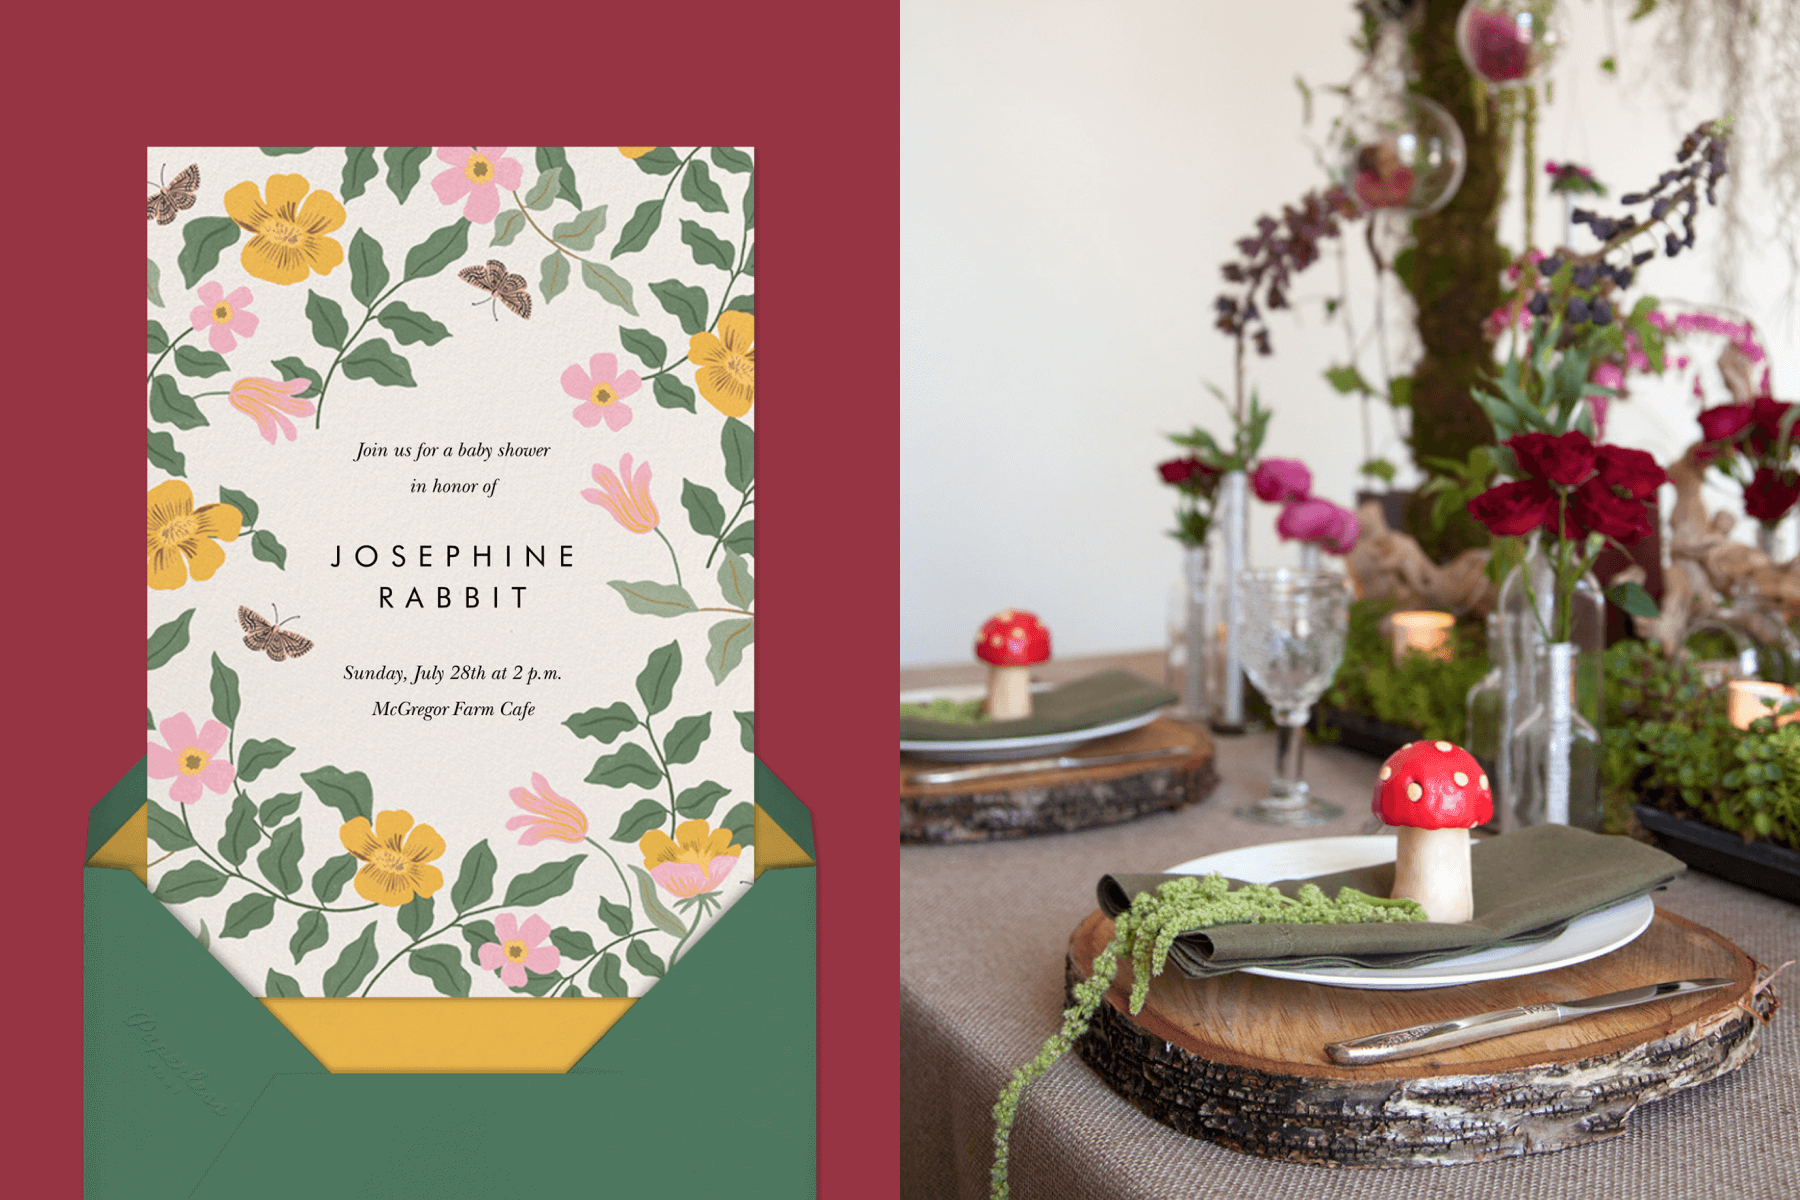 left: A floral baby shower invitation with butterflies. Right: Place settings with tree stump chargers and mushroom decor.